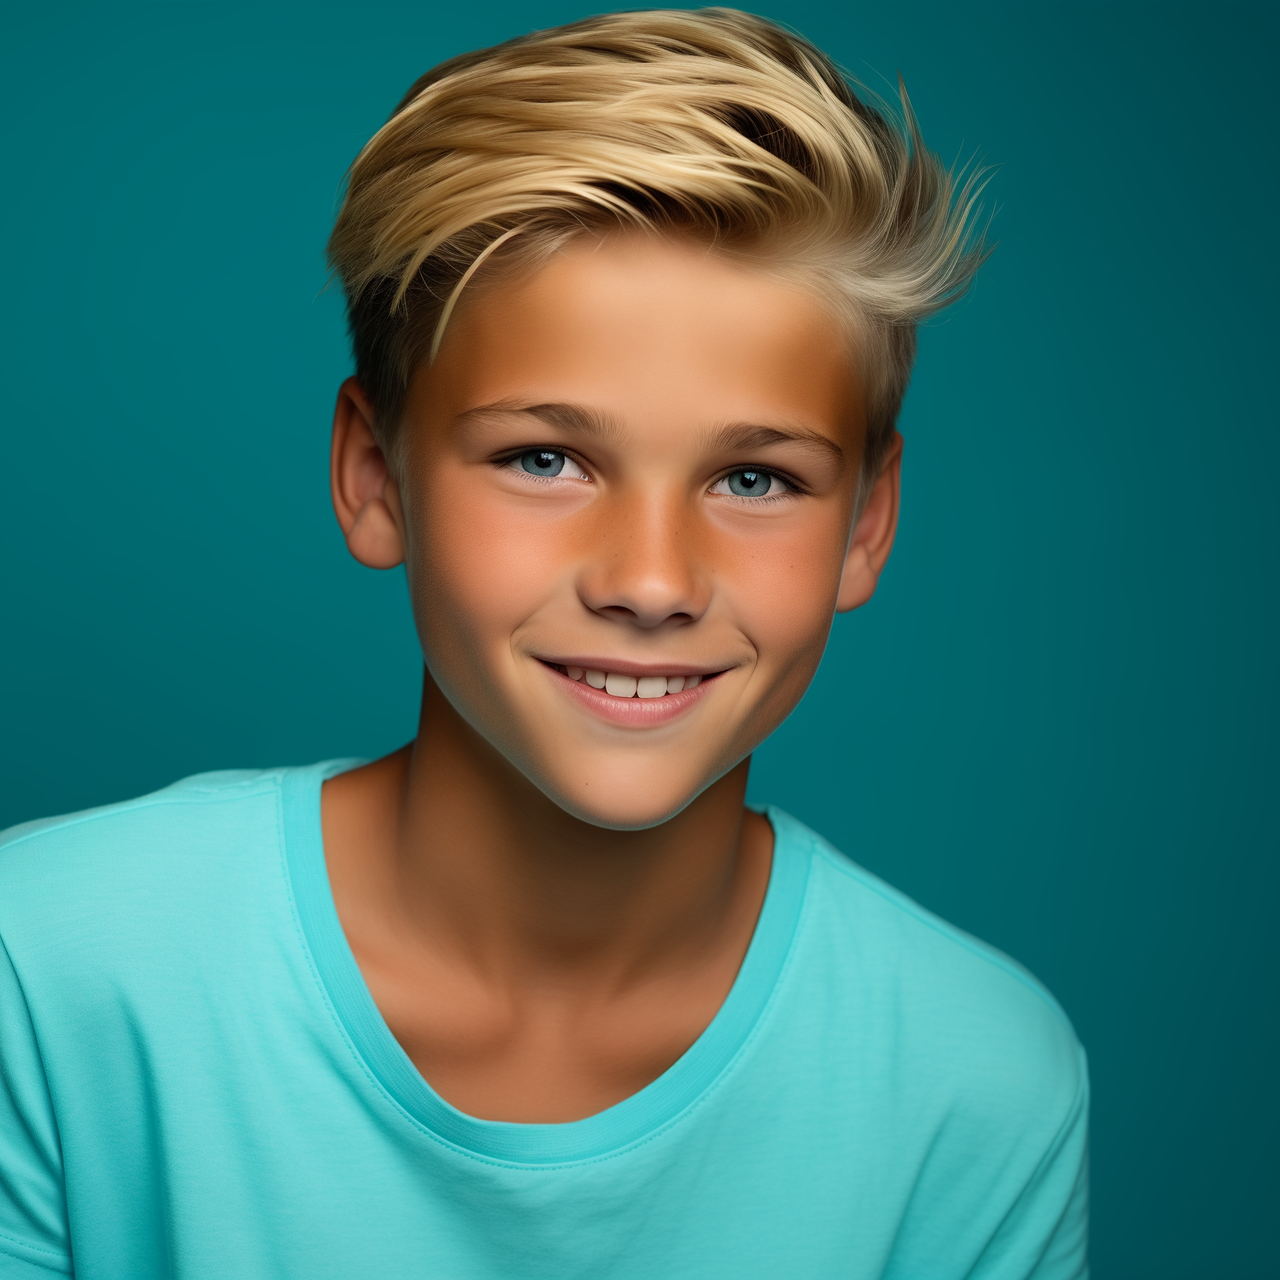 a young boy with blonde hair and a light blue shirt on, smiling in front of a teal background